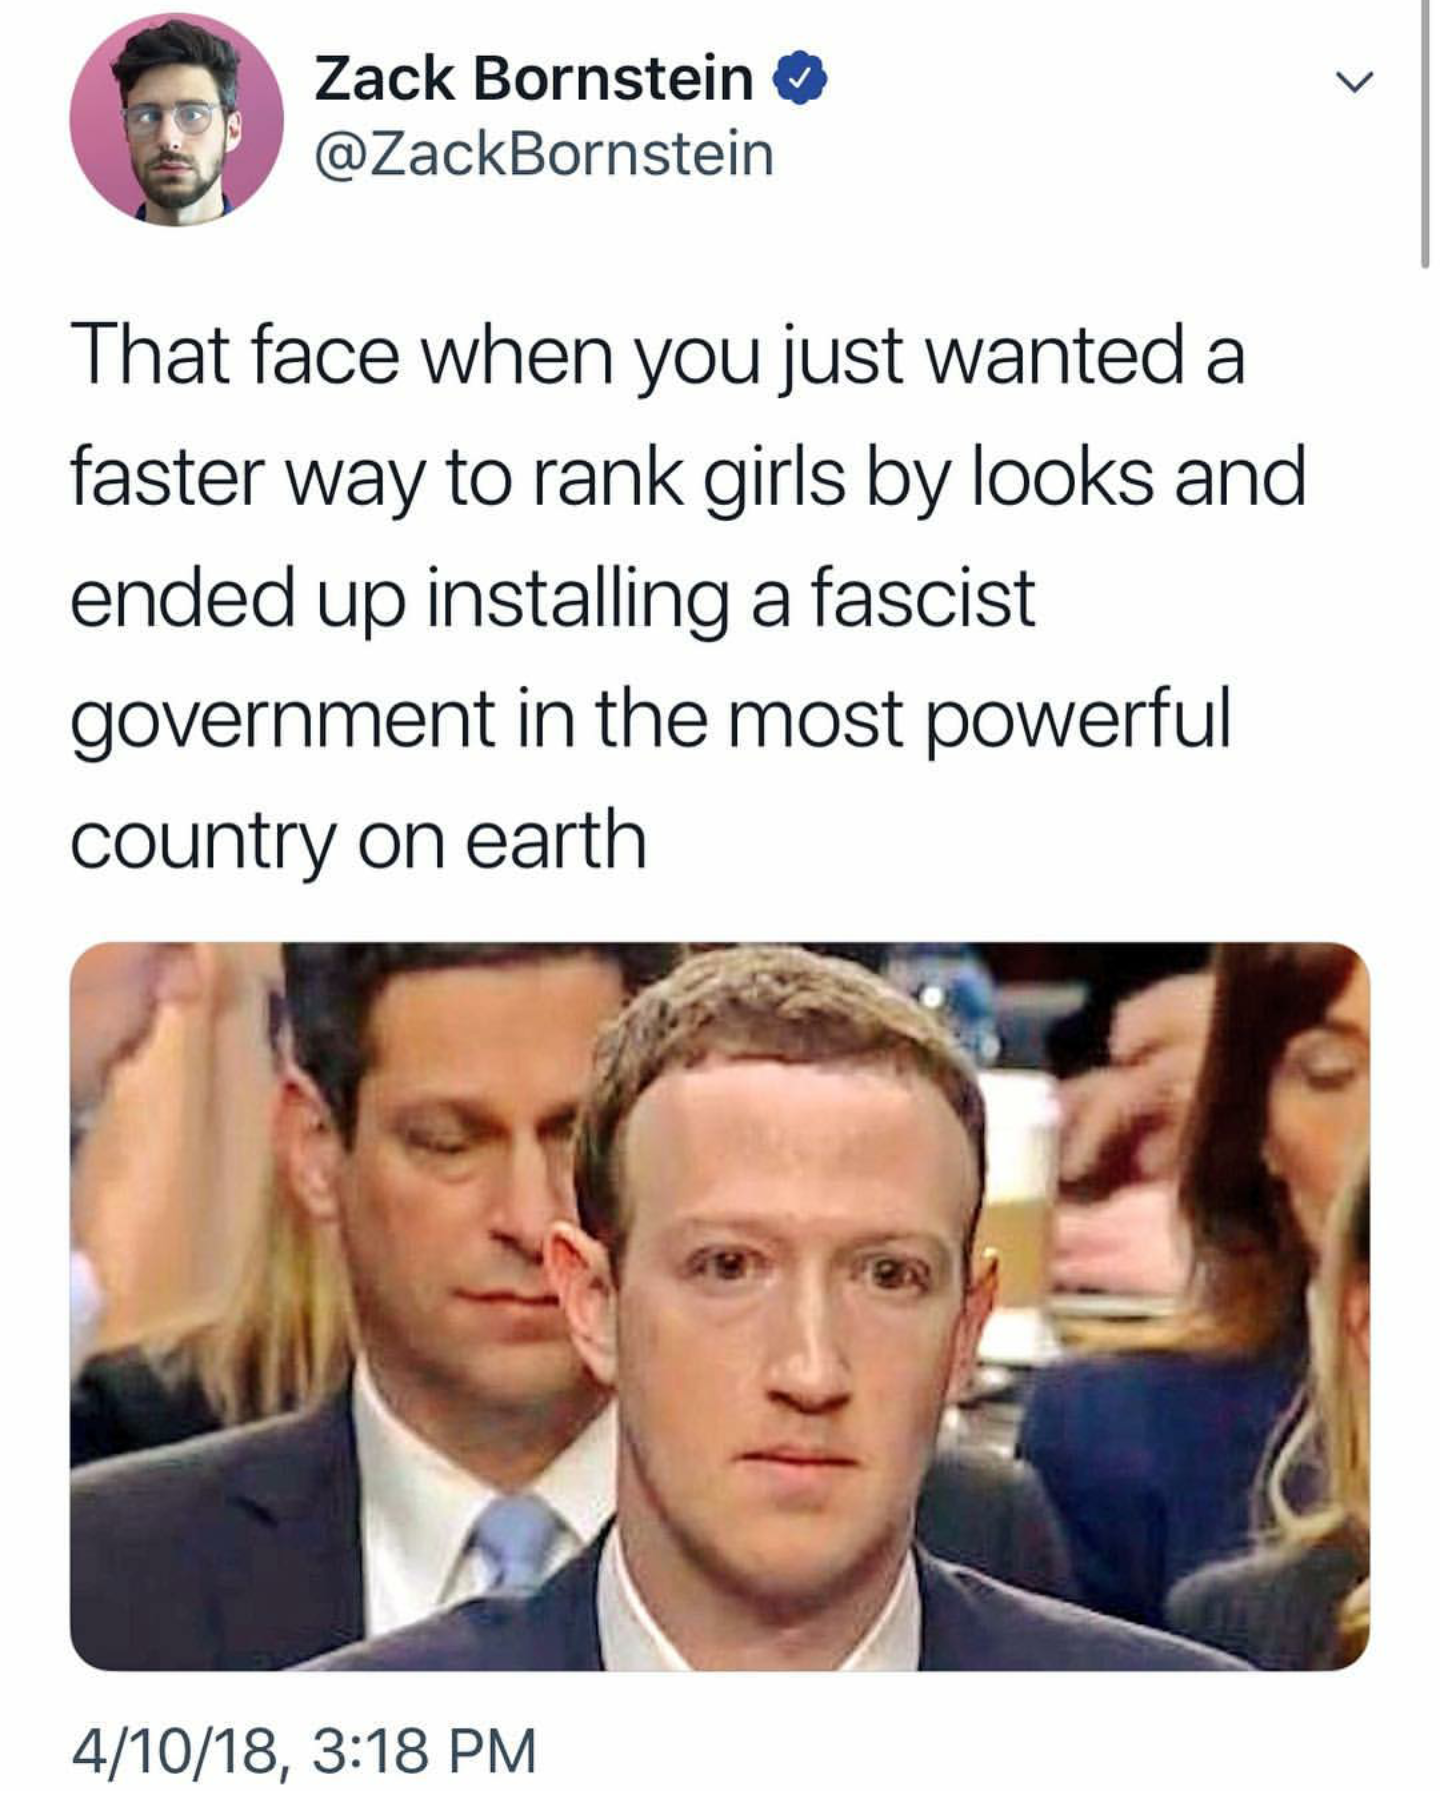 cool facebook congress memes - Zack Bornstein That face when you just wanted a faster way to rank girls by looks and ended up installing a fascist government in the most powerful country on earth 41018,